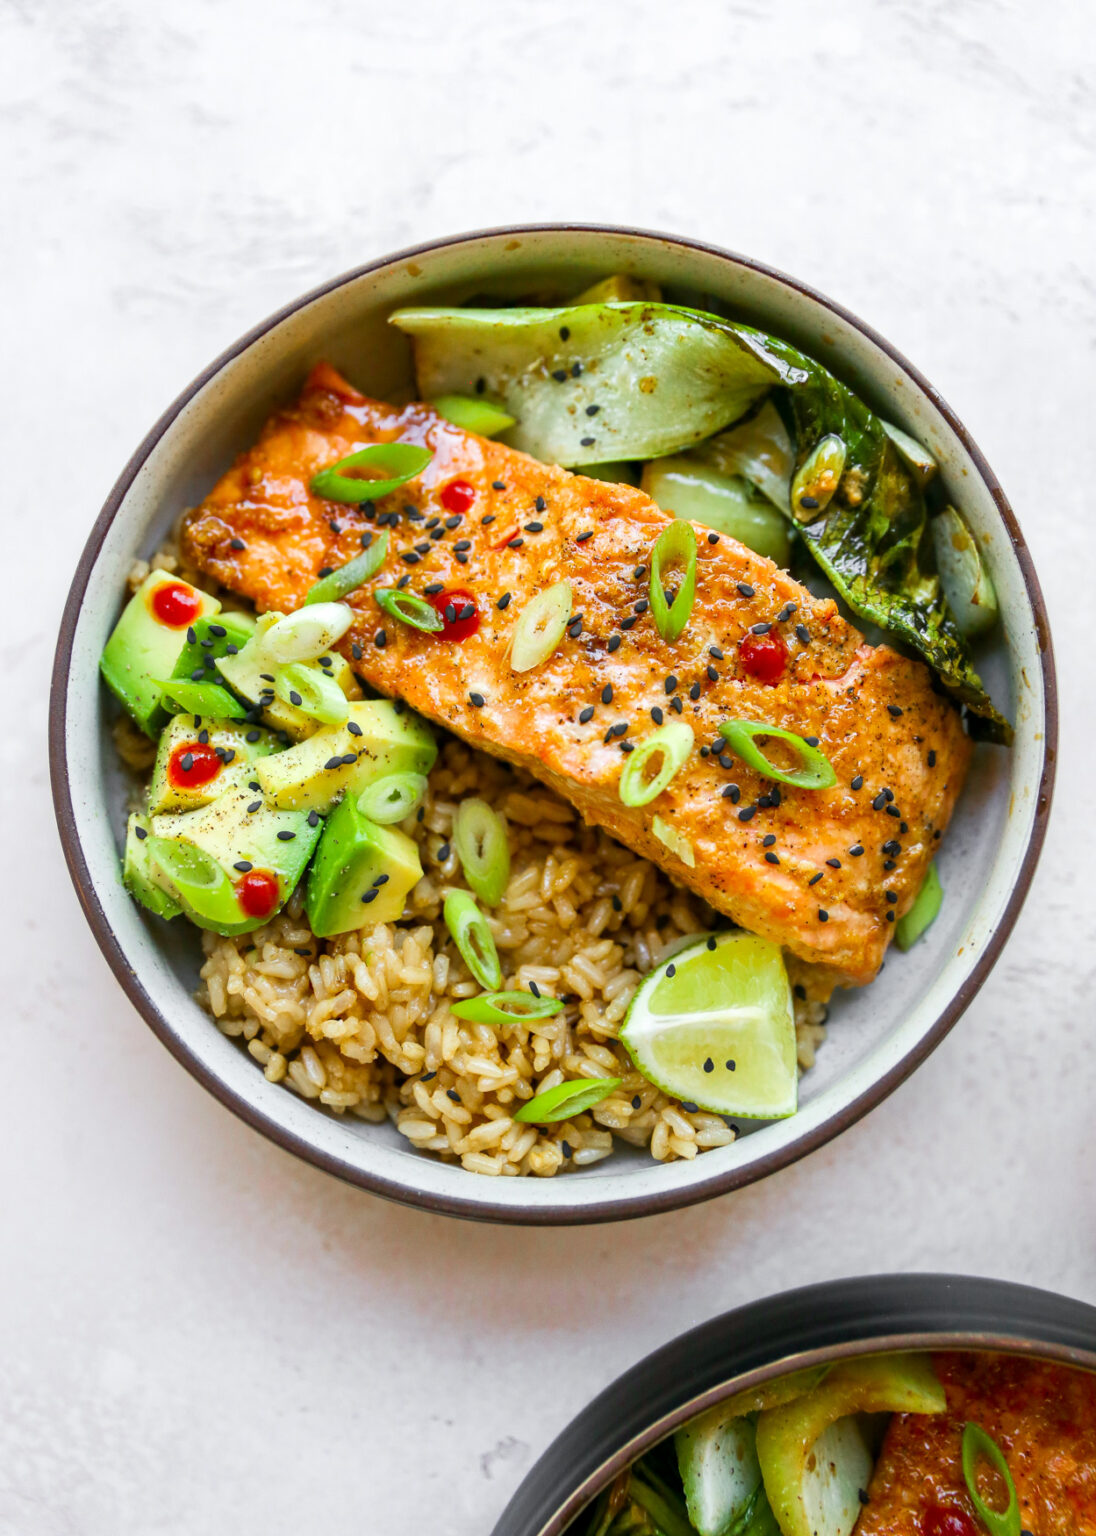 Salmon Grain Bowls with Bok Choy & Spicy Mayo - Yes to Yolks